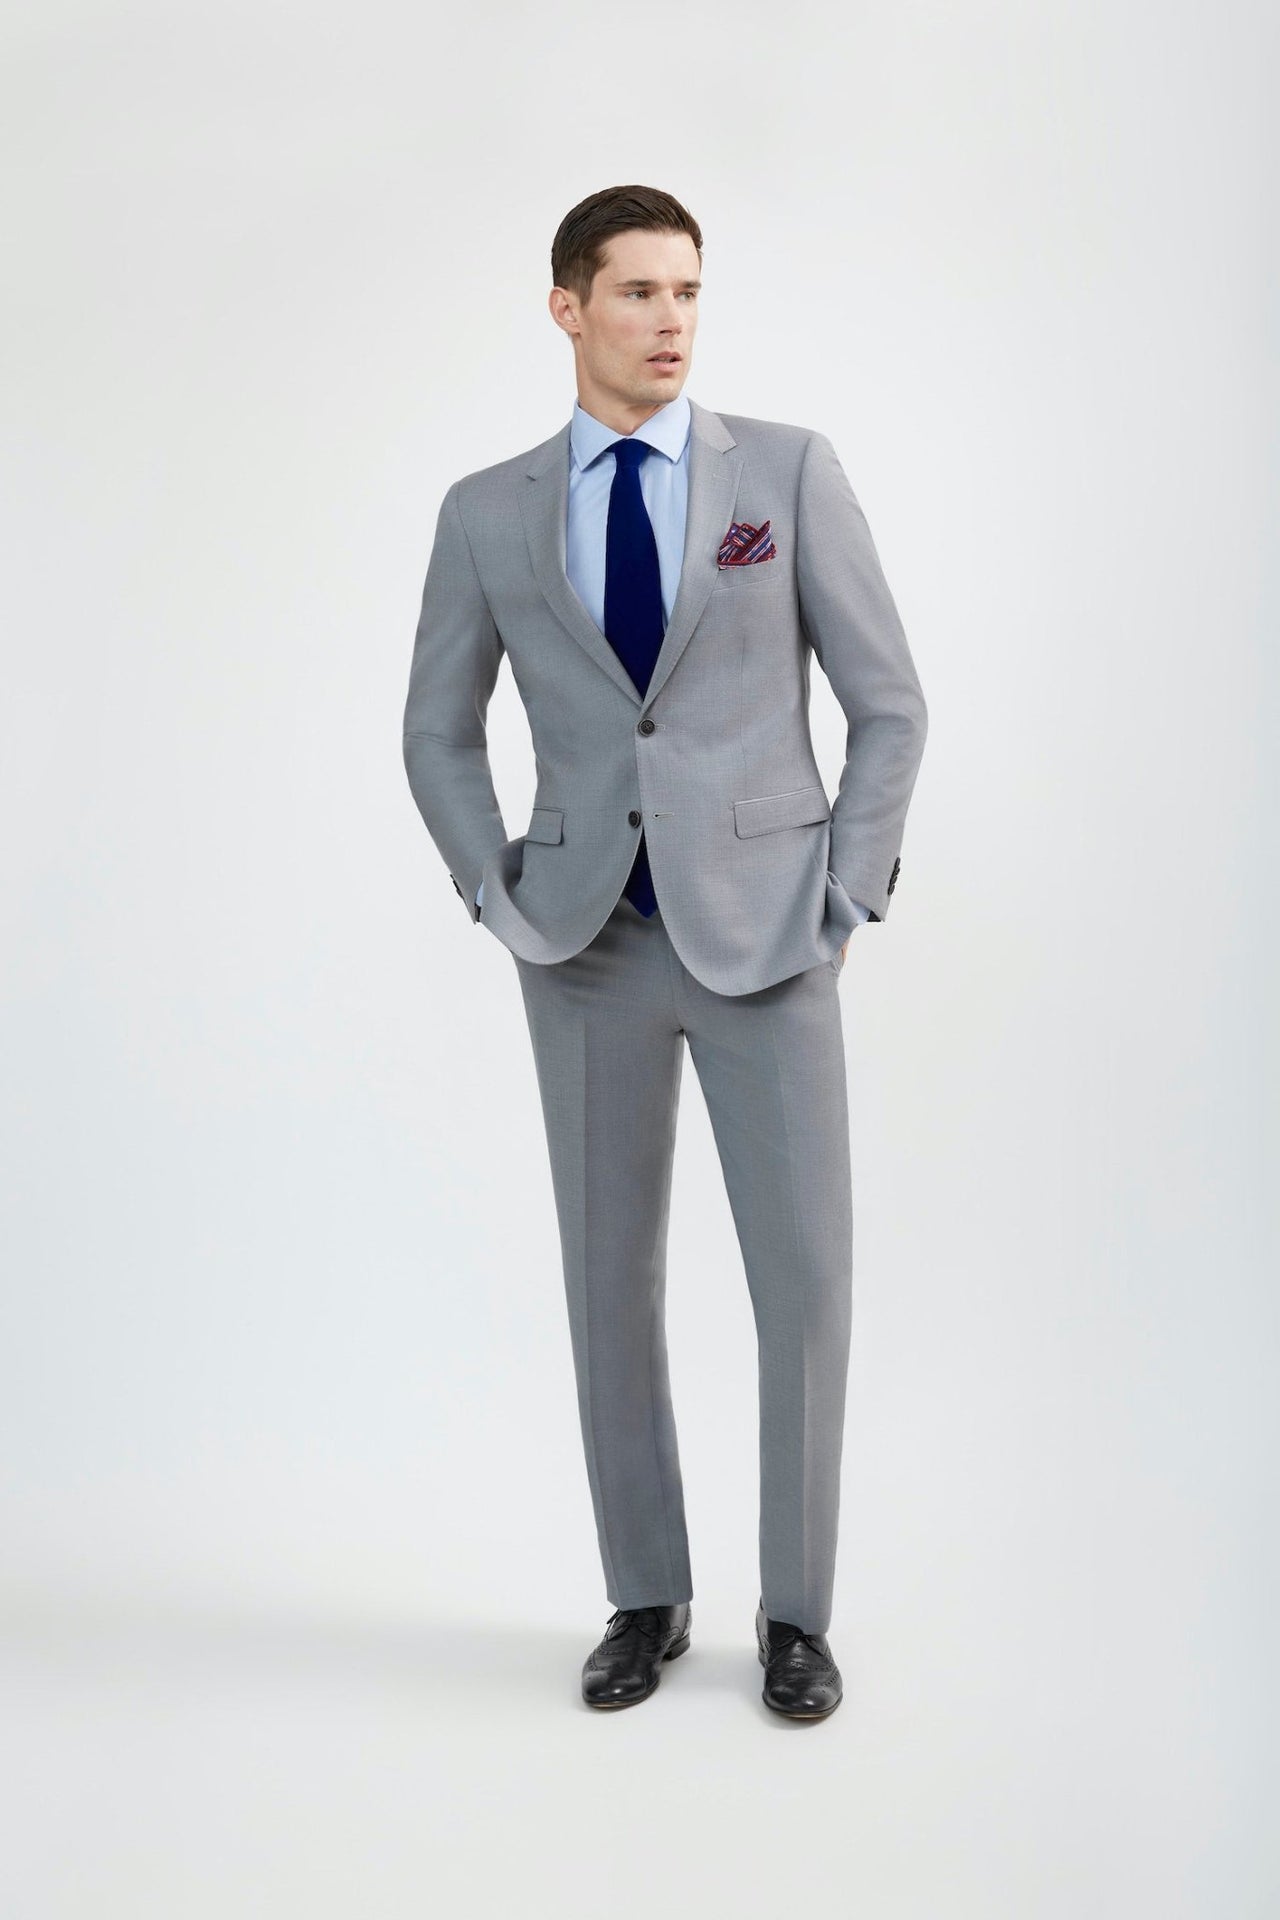 Lite Grey Suit Made From 100% Merino Wool - Tomasso Black